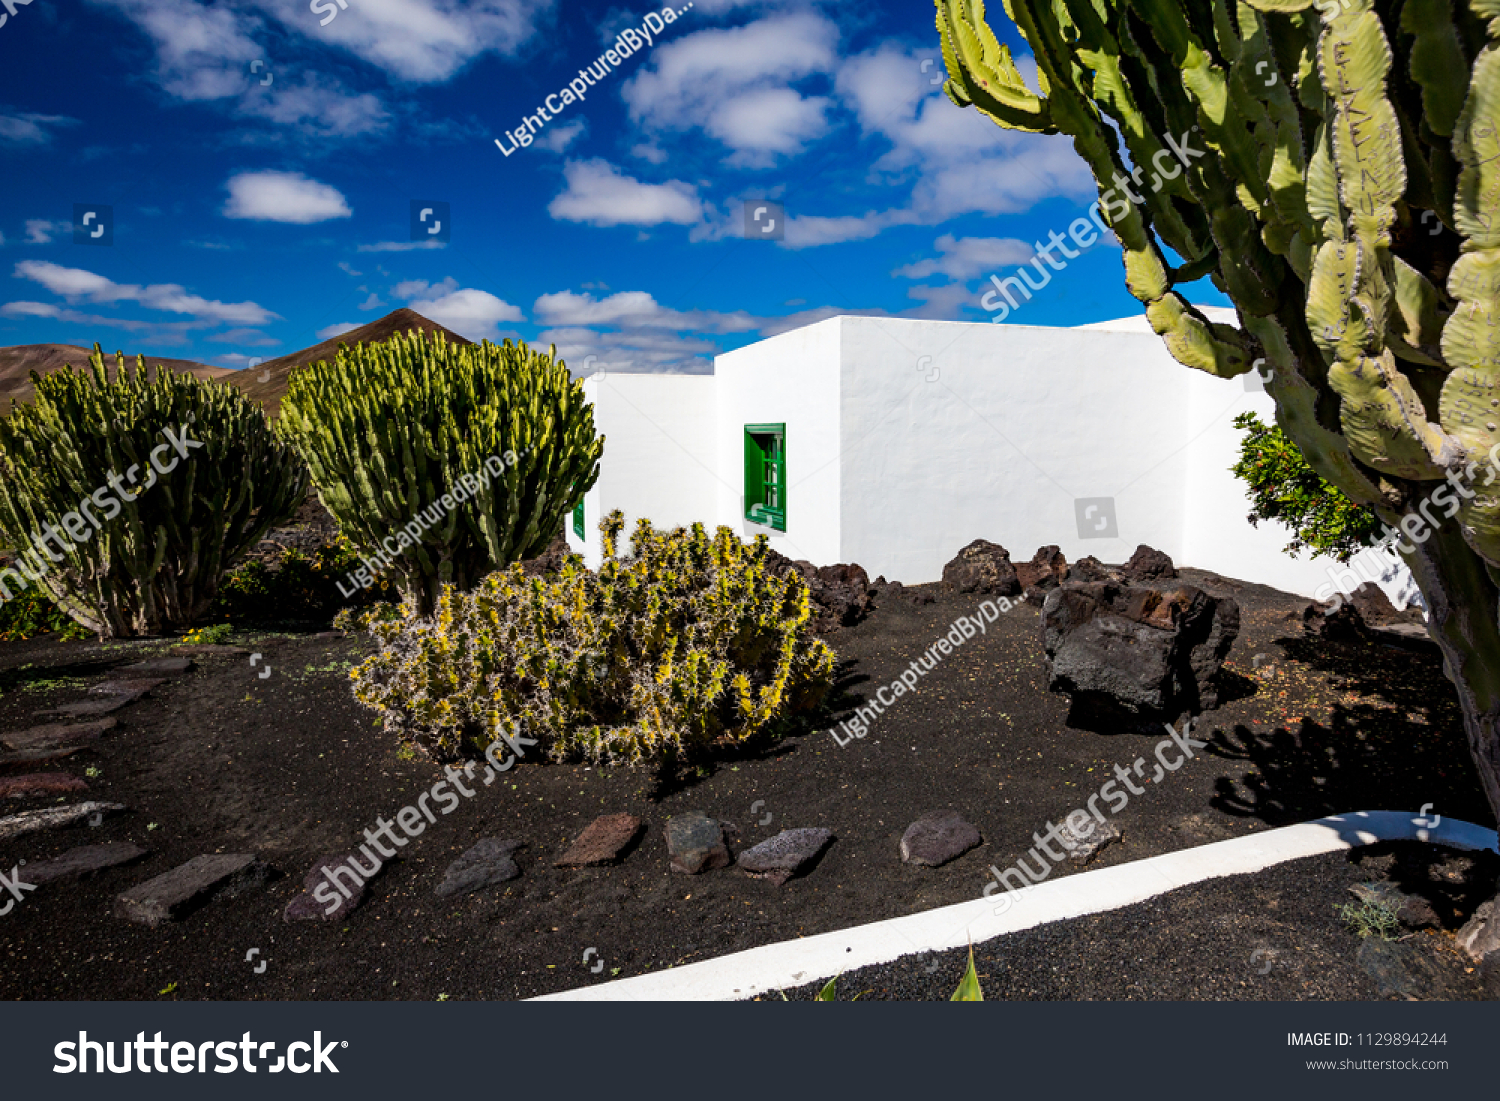 Street view of beautiful residential white stone garden house surrounded by black volcanic soil and huge cactuses with patio and great blue spring sky with white clouds, Lanzarote,Canary Islands,Spain #1129894244